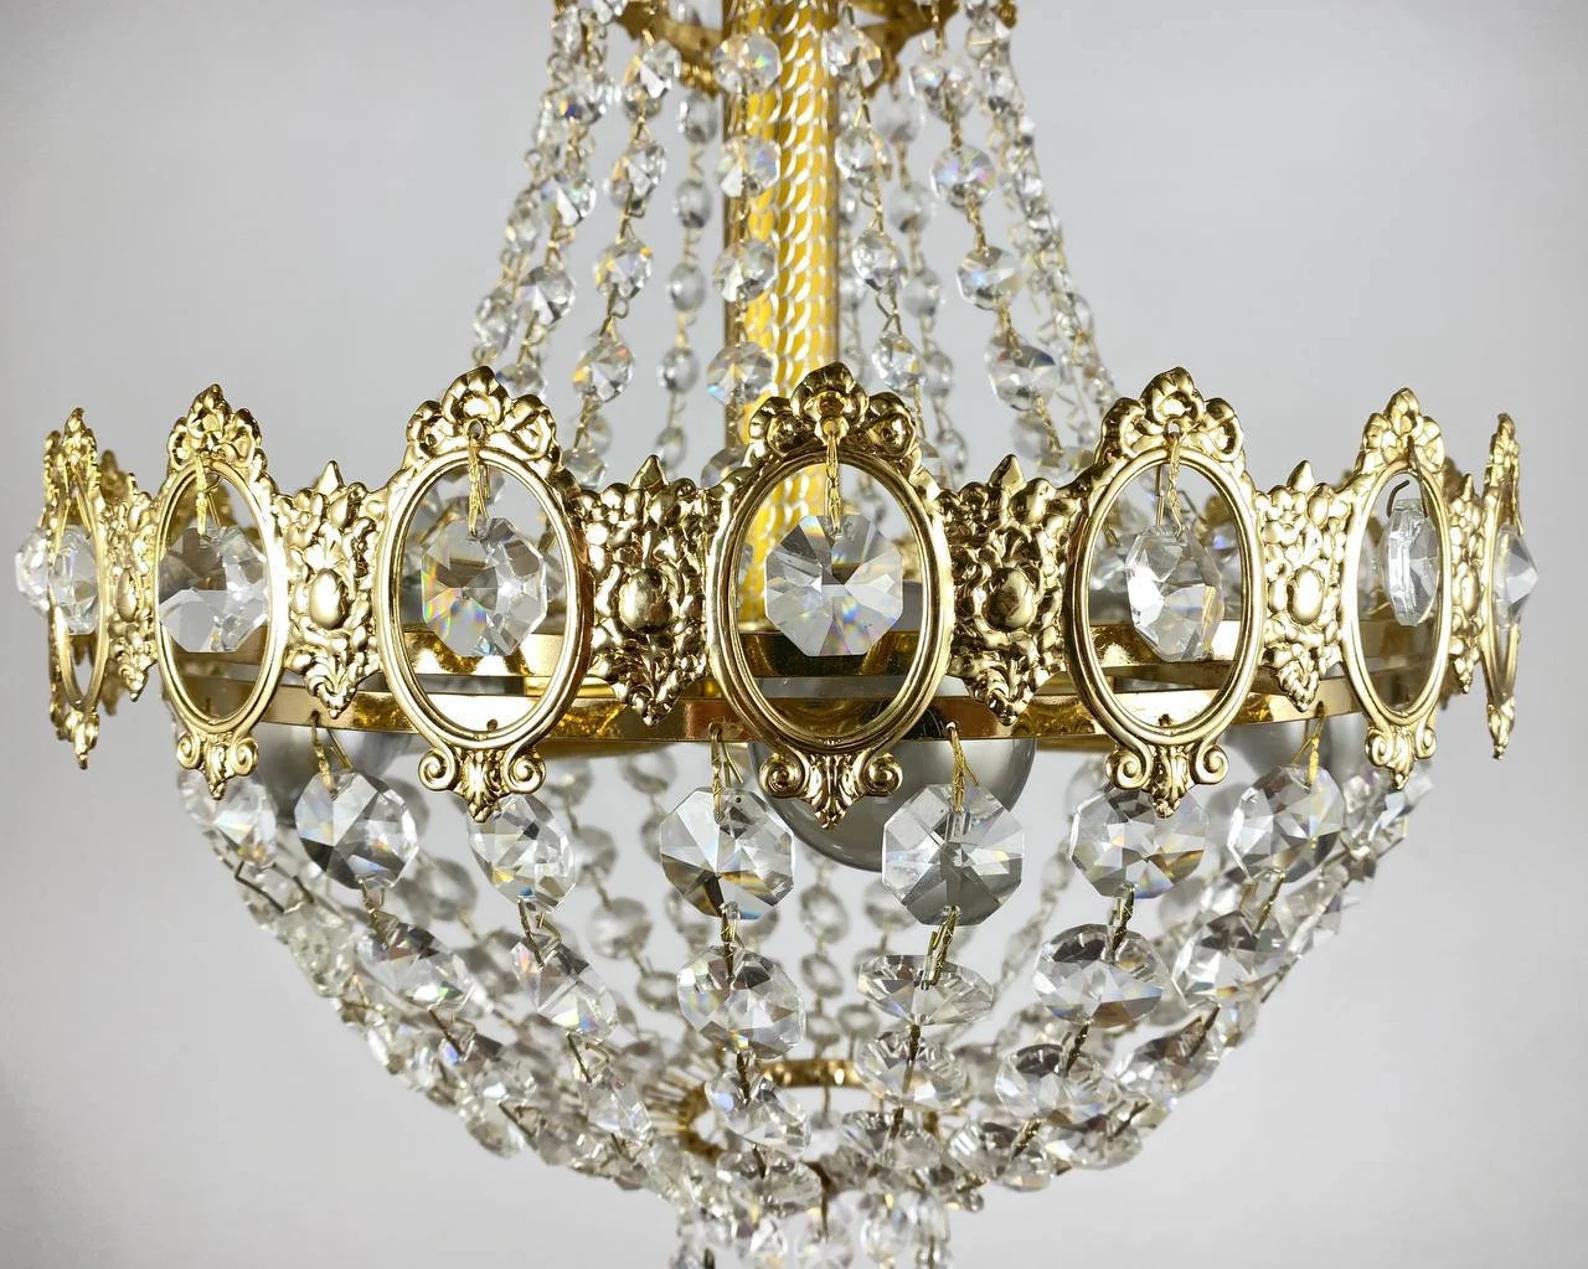 Empire style glass chandelier features 6 lights and framework with a golden iron.

Made in Belgium. 1970s.

This chandelier is lavishly draped in fine quality sparkle transparent glass cut facets.

Surprisingly elegant and memorable ceiling